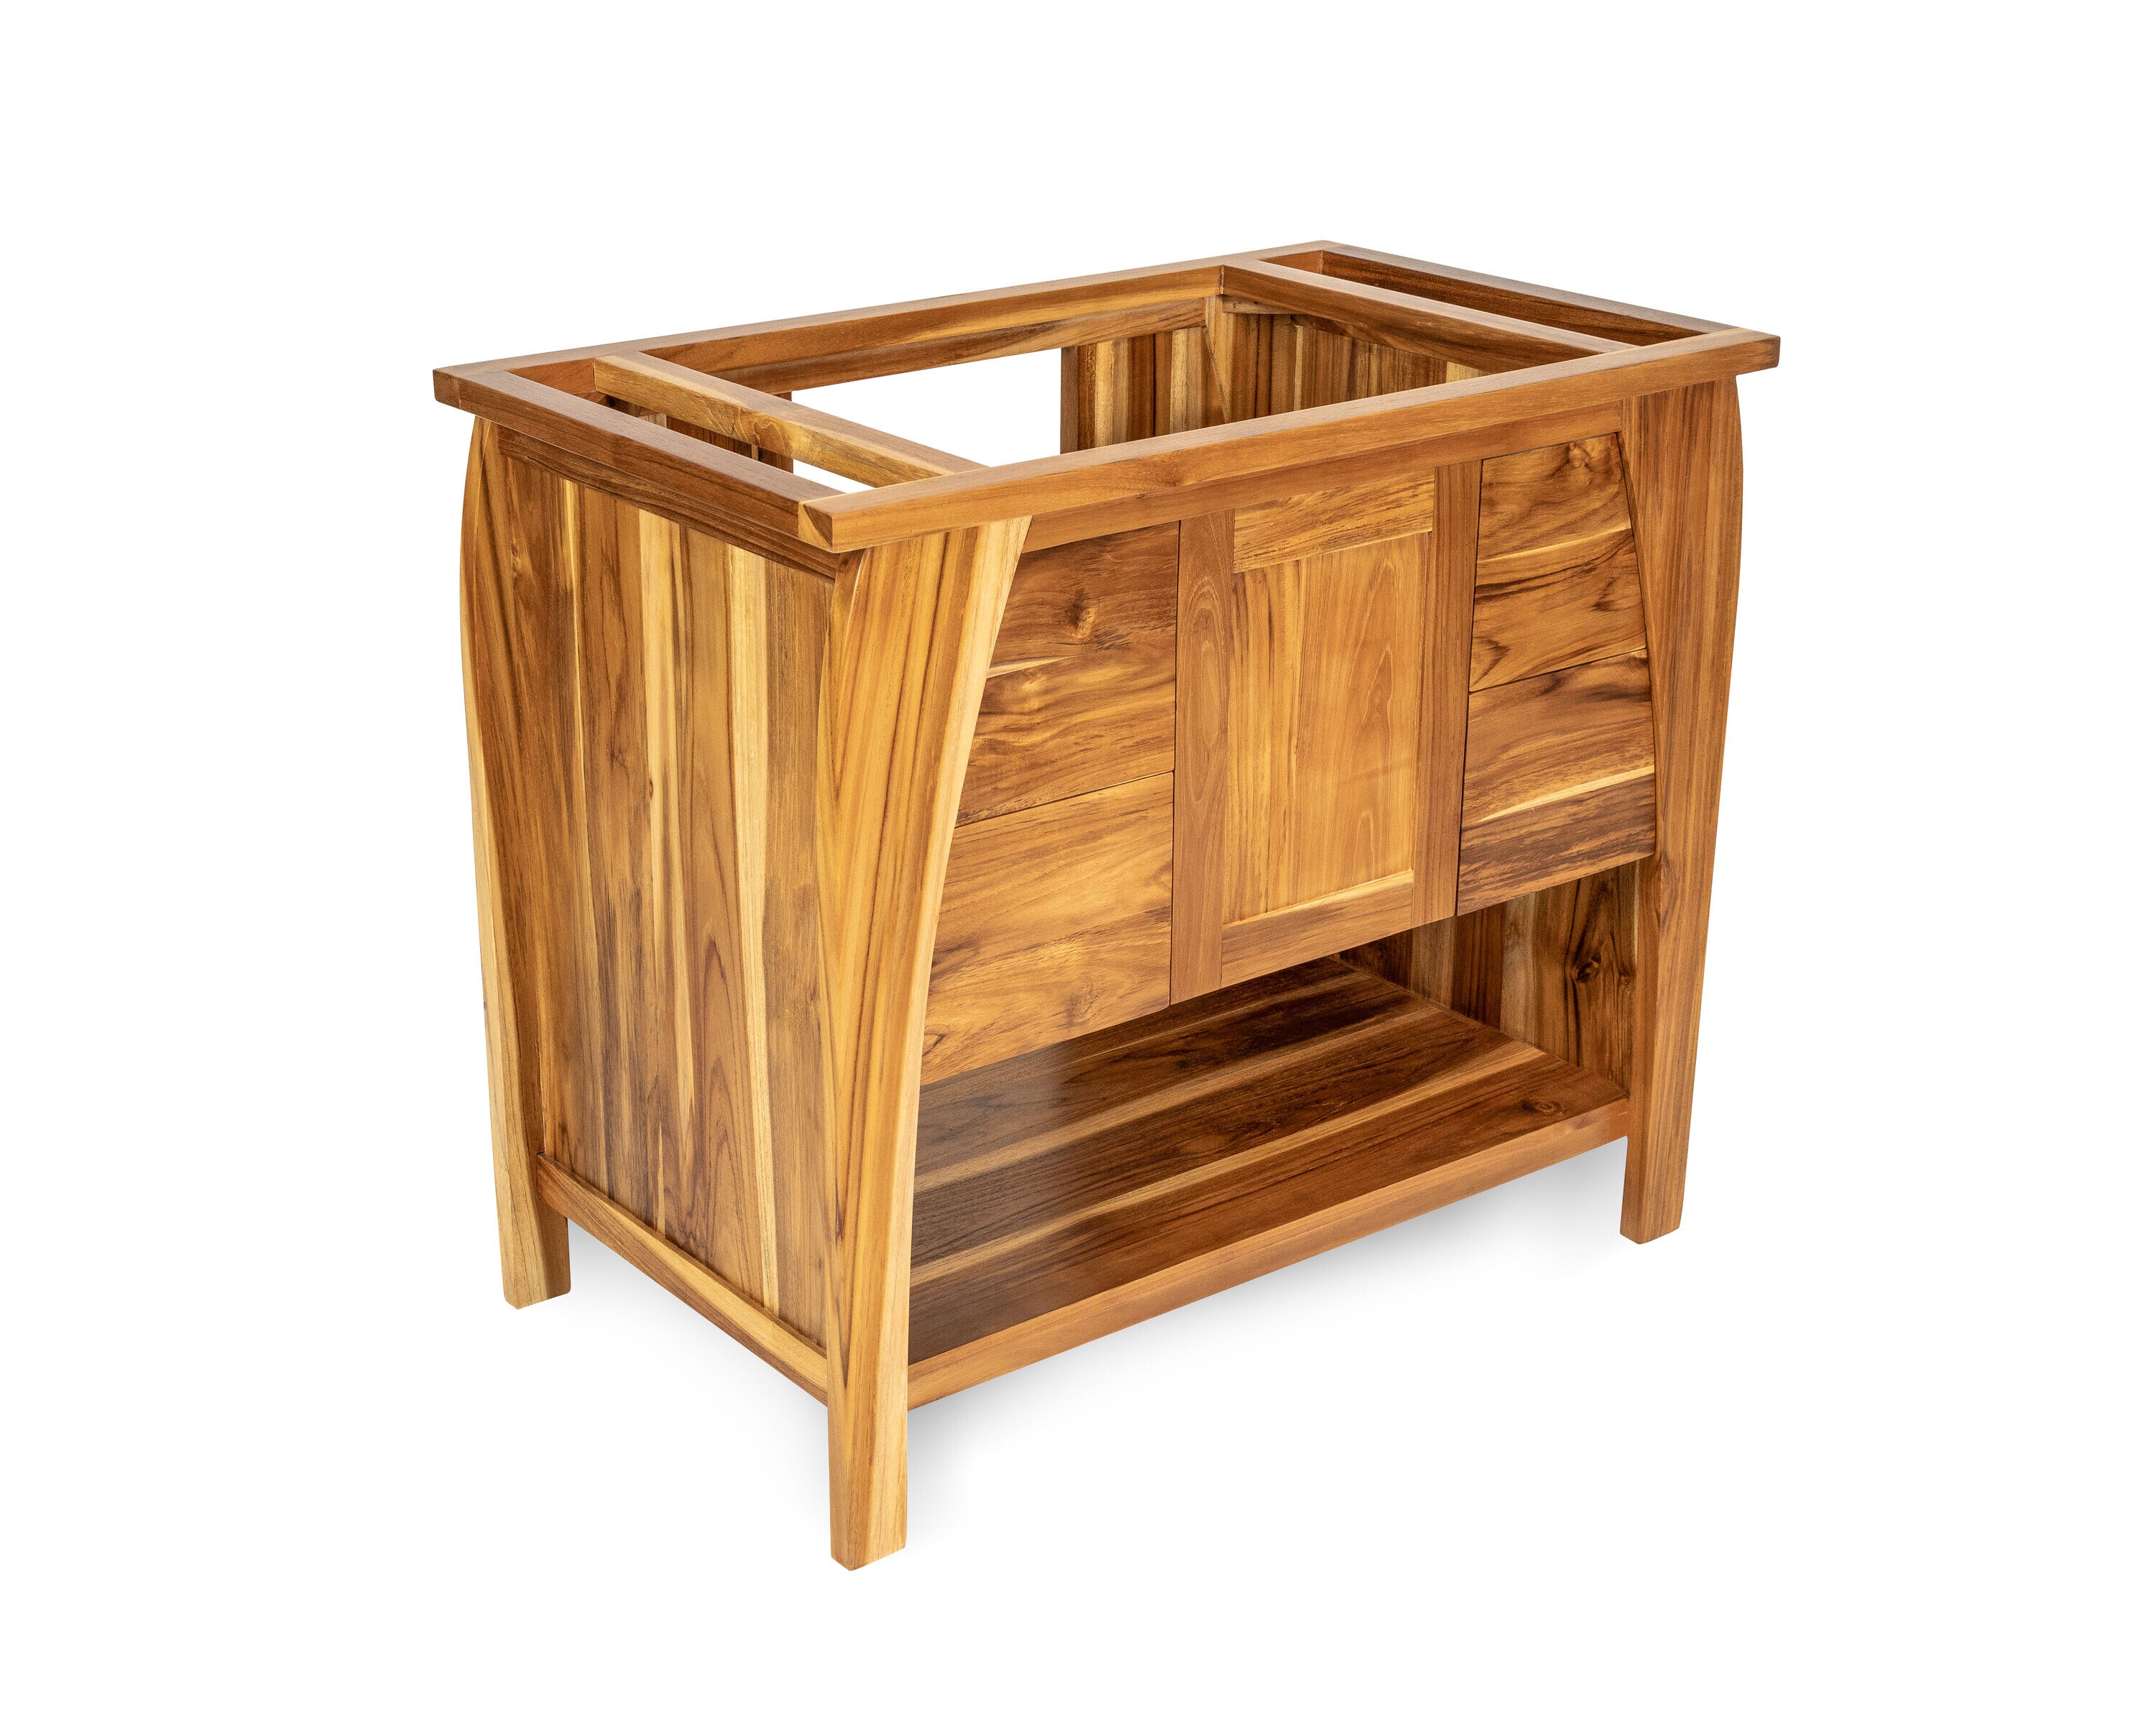 EcoDecors Significado 36 in. L Teak Vanity Cabinet Only in Natural